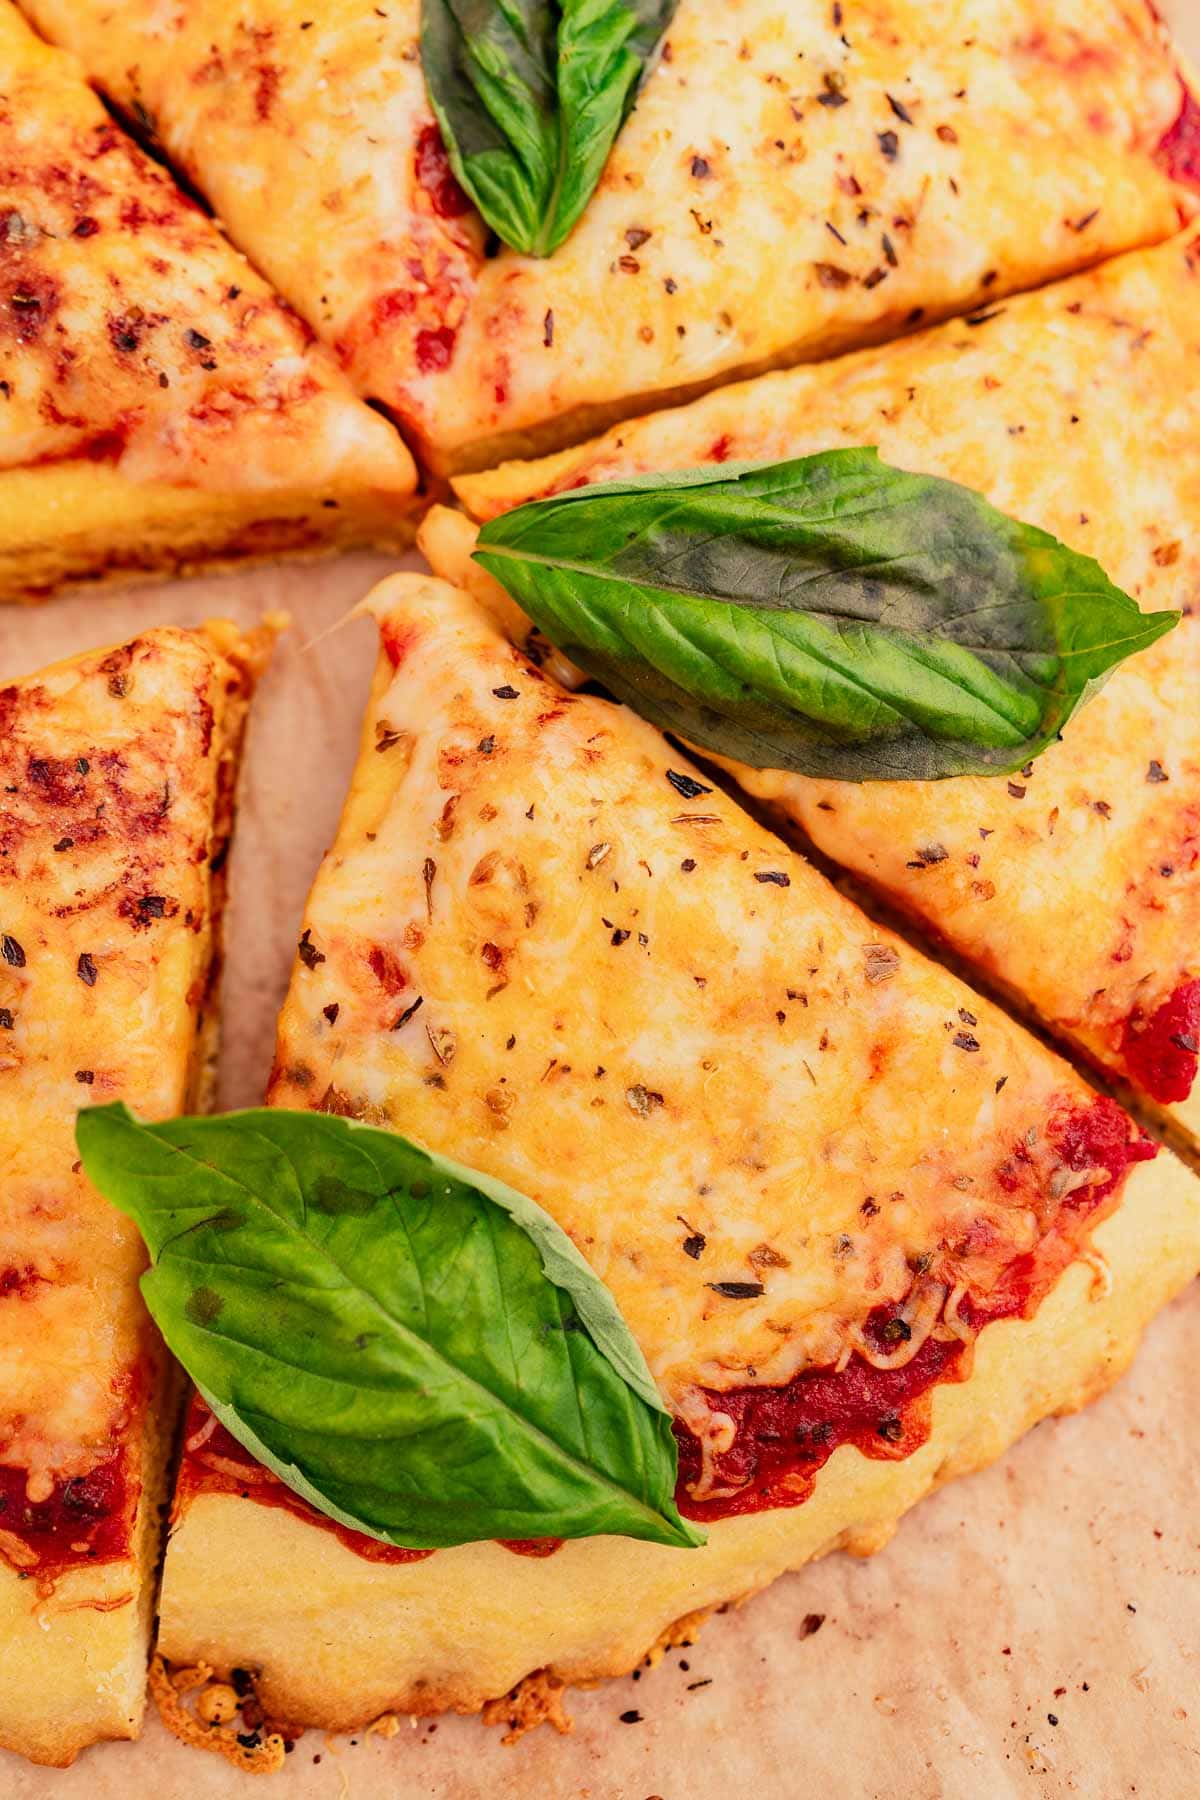 Sliced cheese pizza with fresh basil leaves on top, served on a chickpea flour pizza crust and a wooden surface.